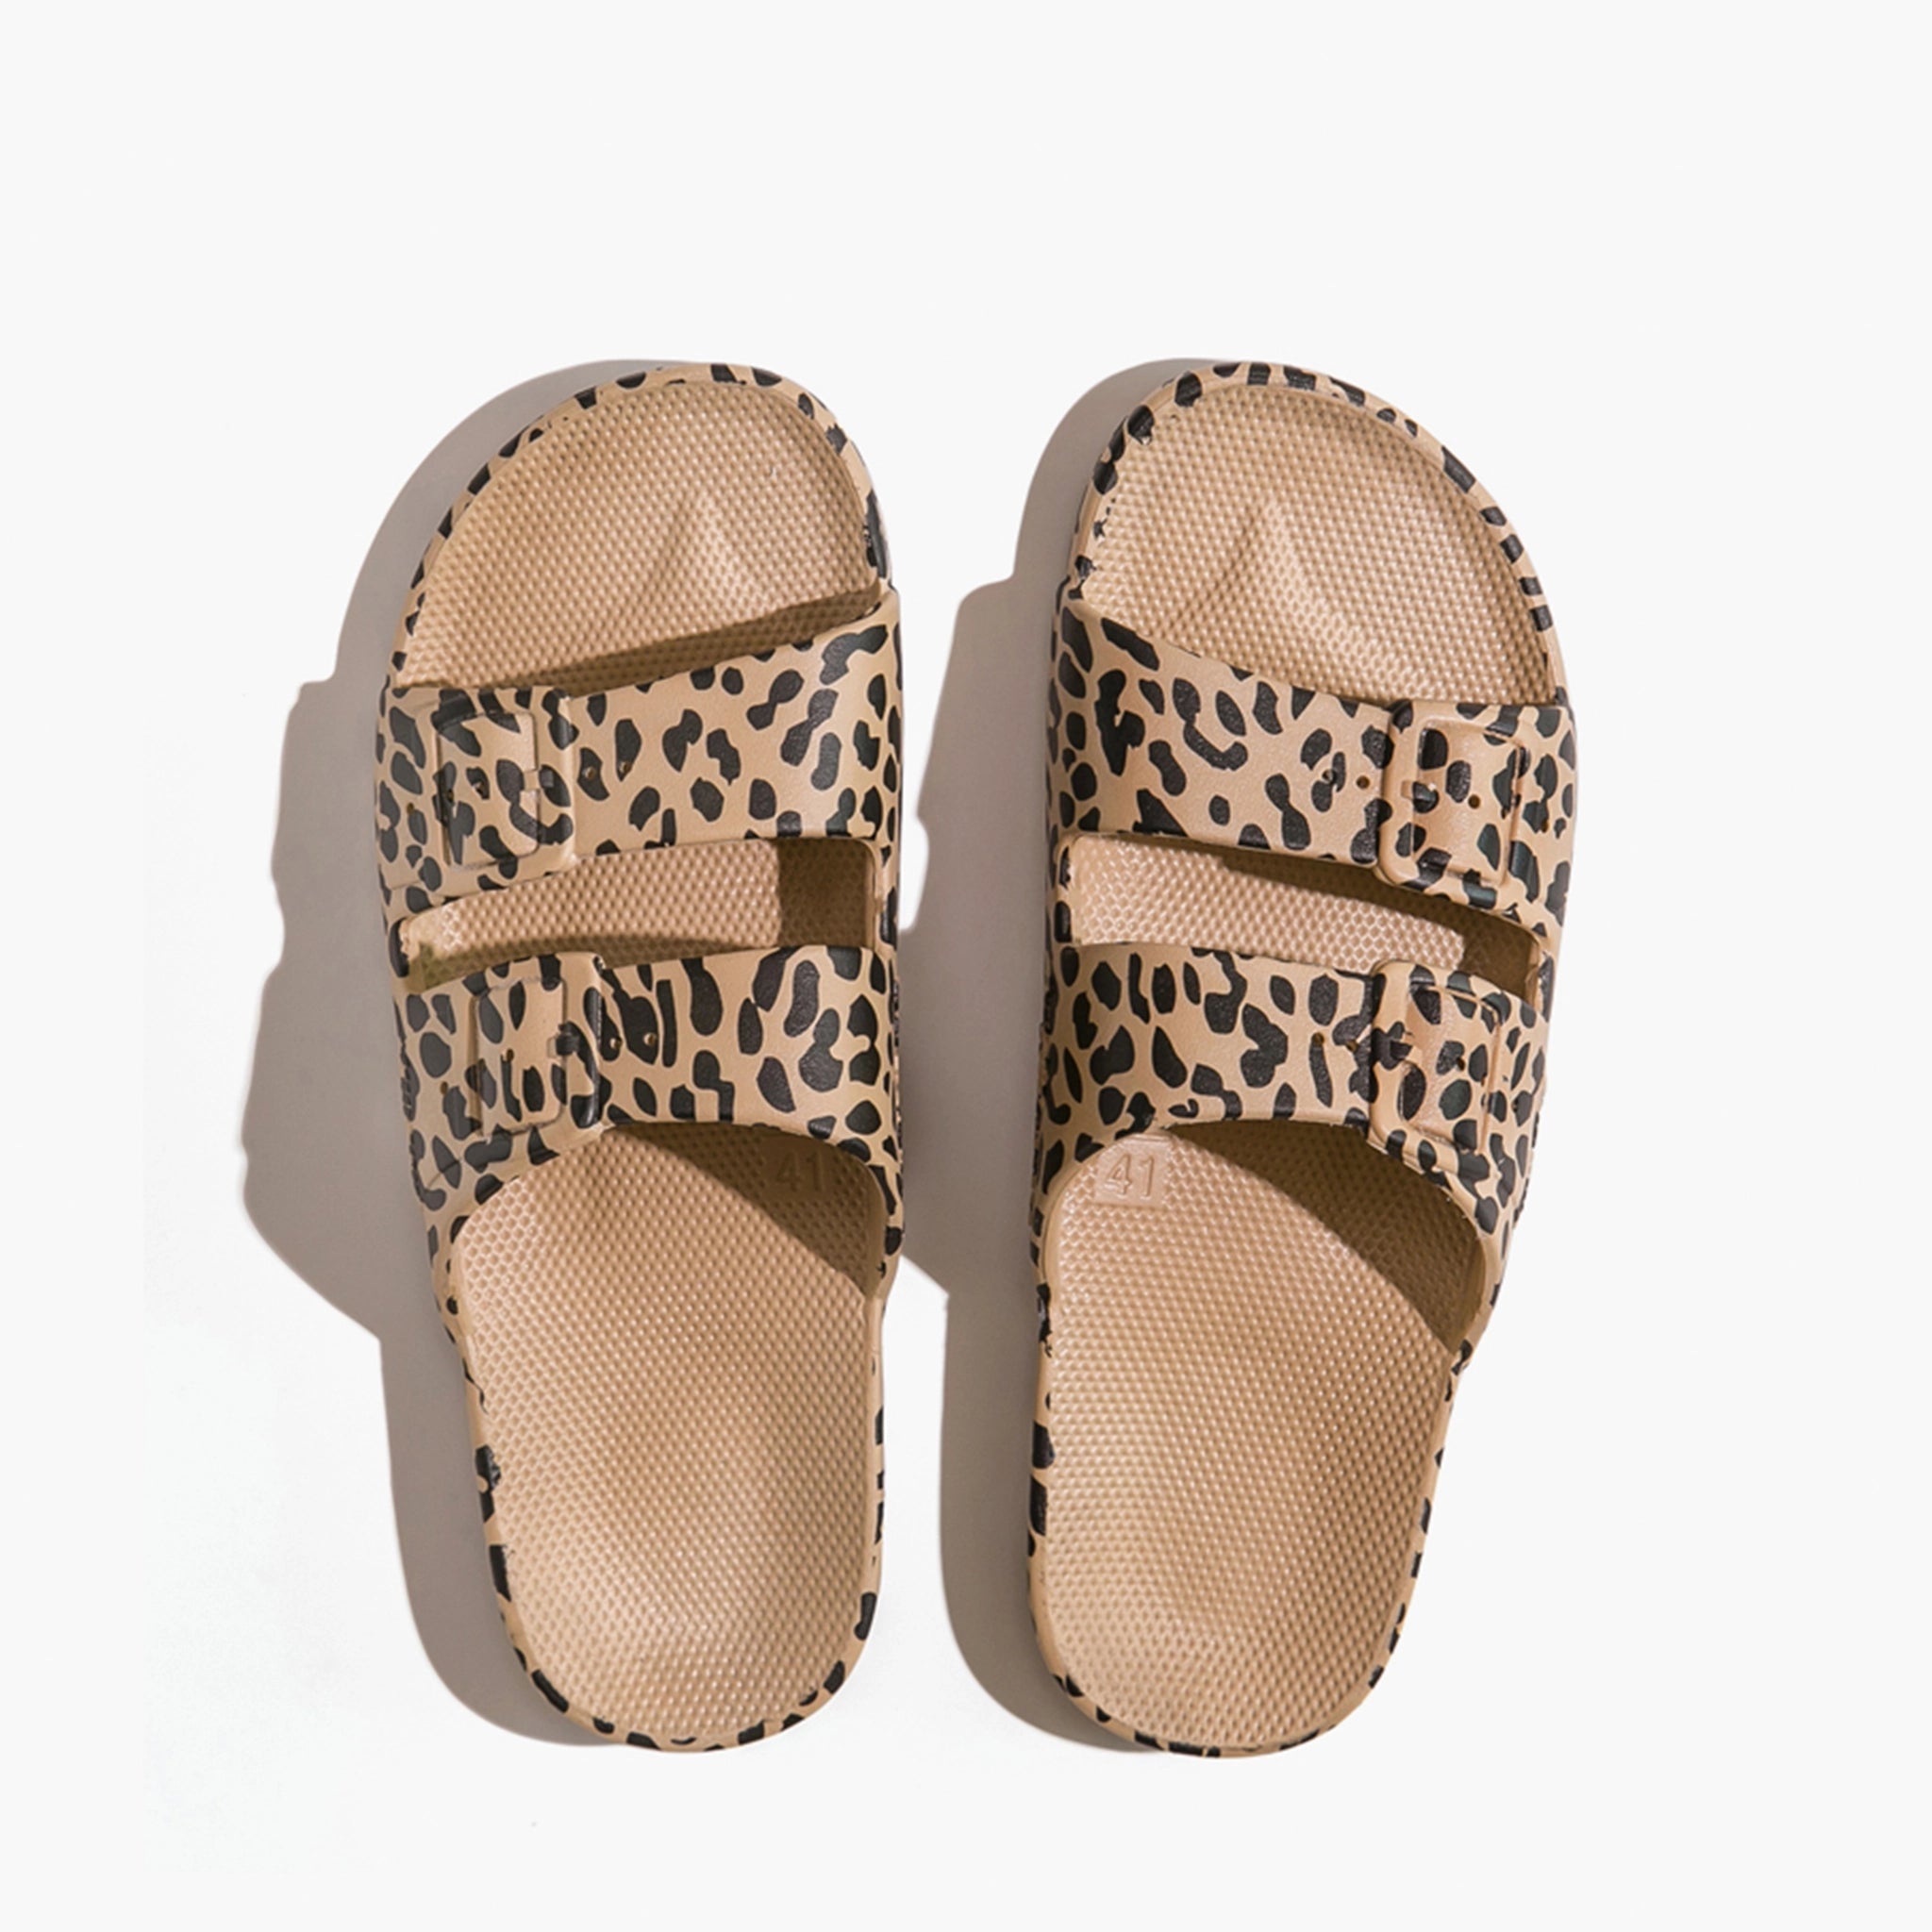 On a white background is a pair of leopard print sandals with two straps across the front. 